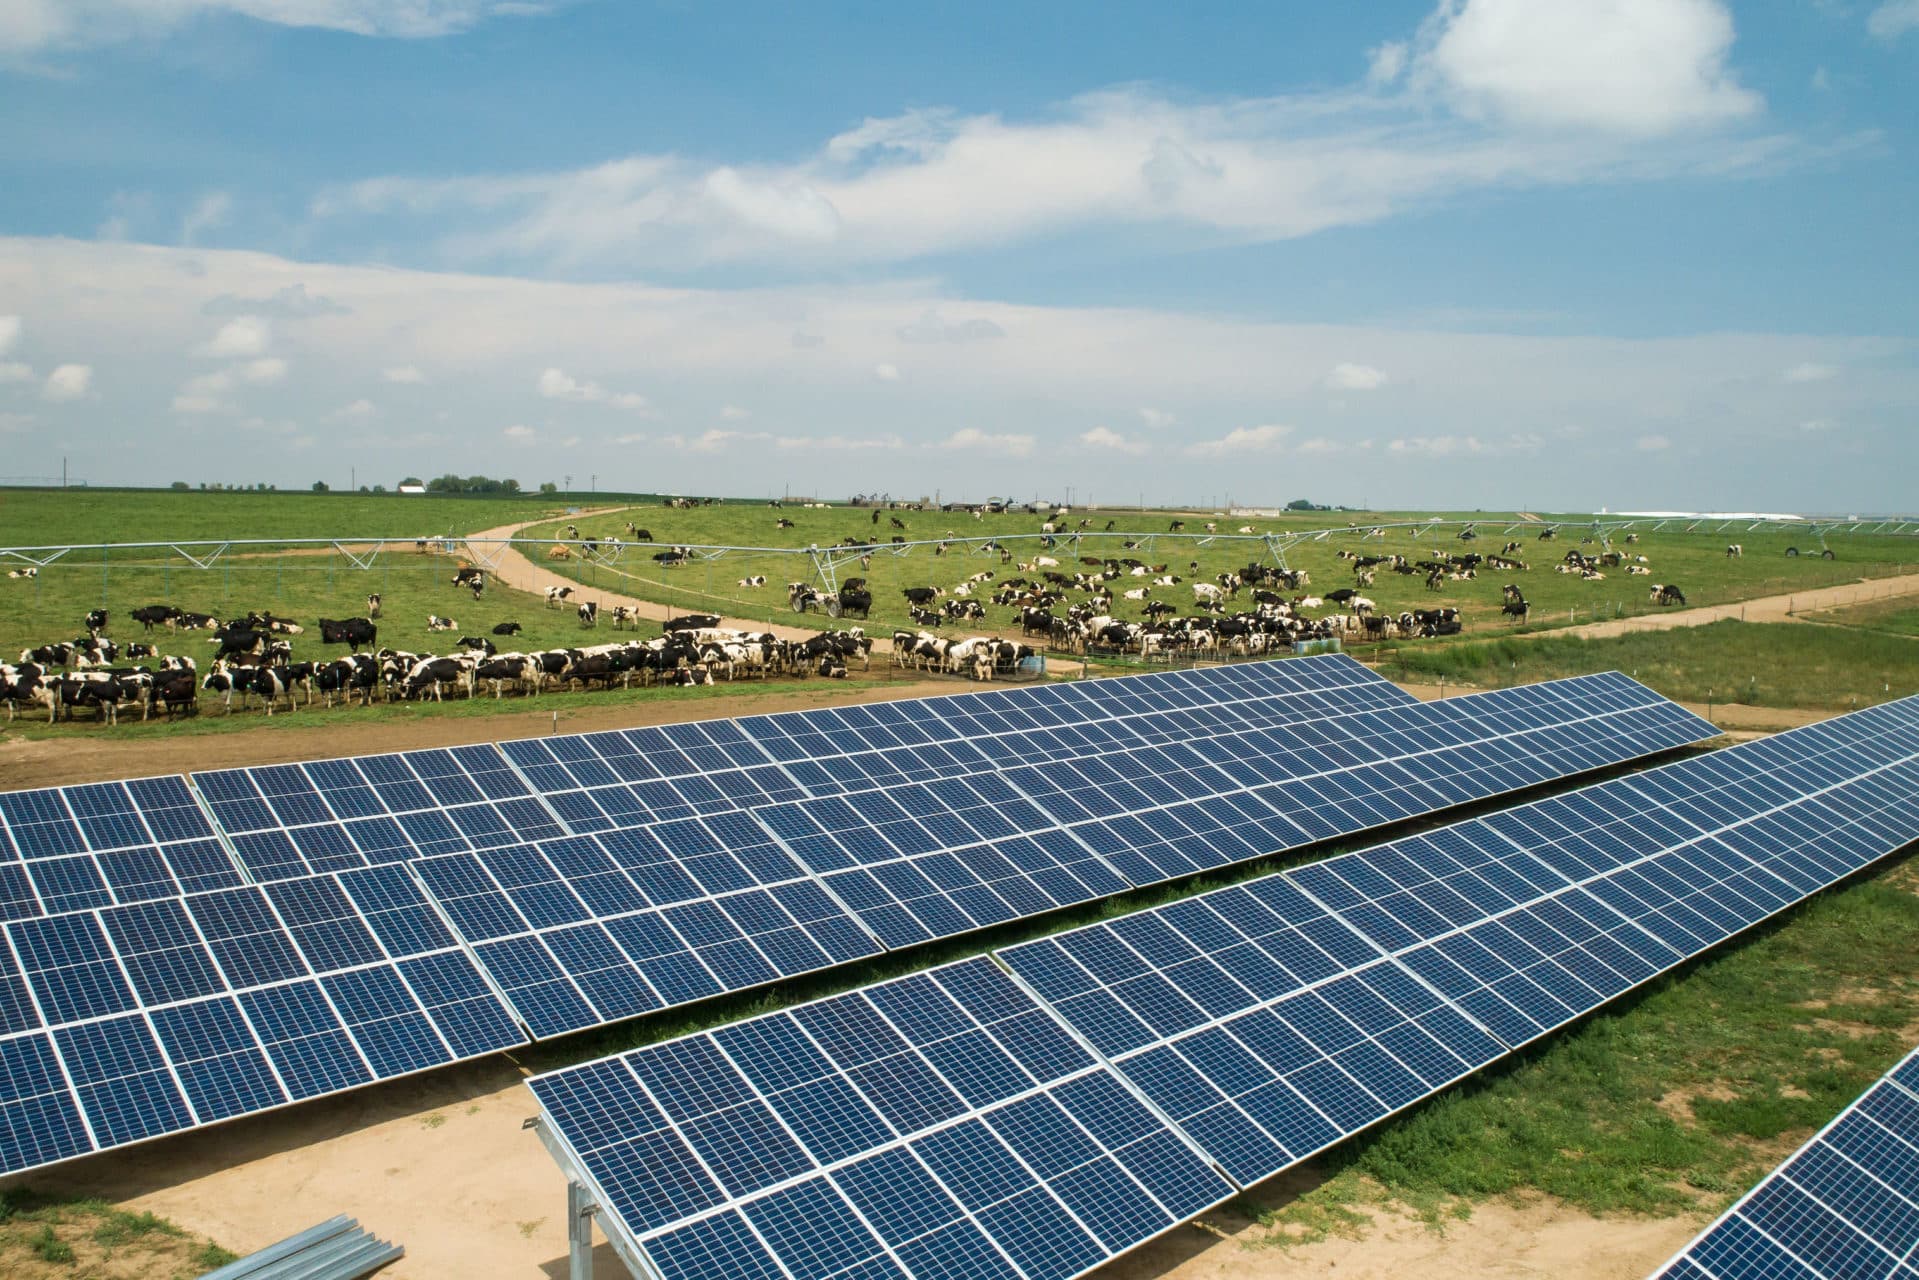 solar panels on ground with dairy cows in background